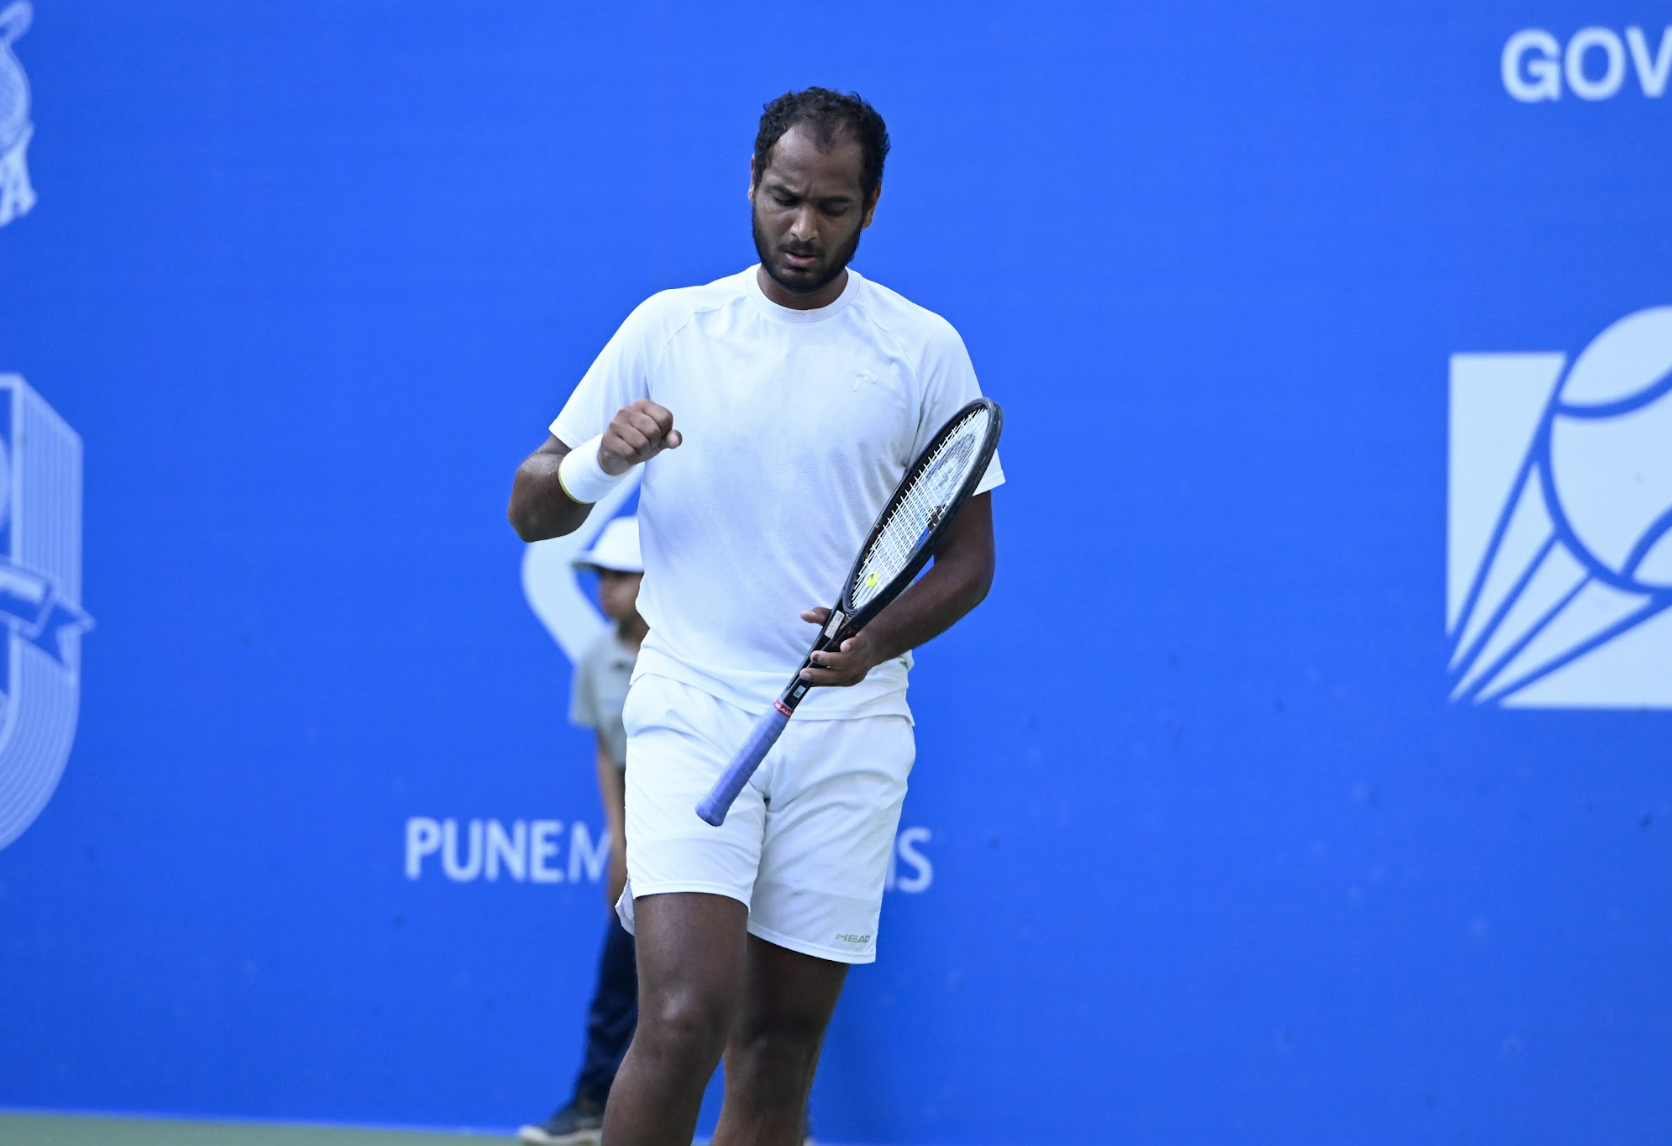 “I’ve been playing well the past few months” – Ramkumar Ramanathan, after beating last week’s champion Stefano Napolitano